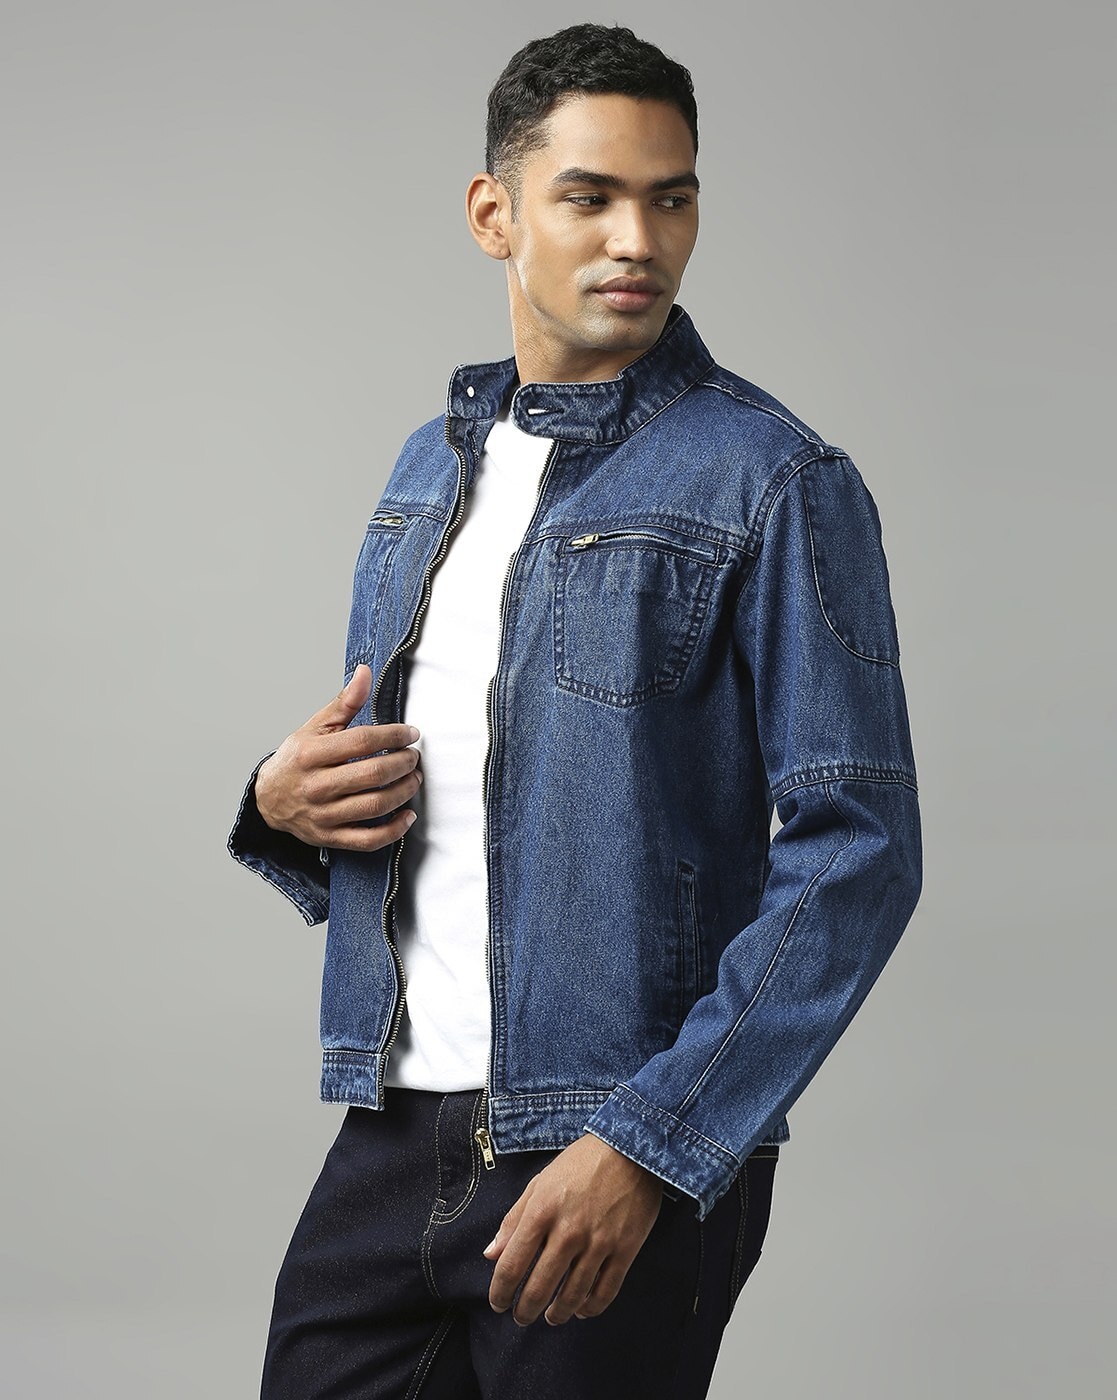 MENS - Denim collection | The jacket of all trades is here -The Denim Jacket  that fits every mood. Grab your pick now: http://bit.ly/AJIO_FBMDD  #DoubtIsOut #OwnAnAJIO | By AJIOlifeFacebook